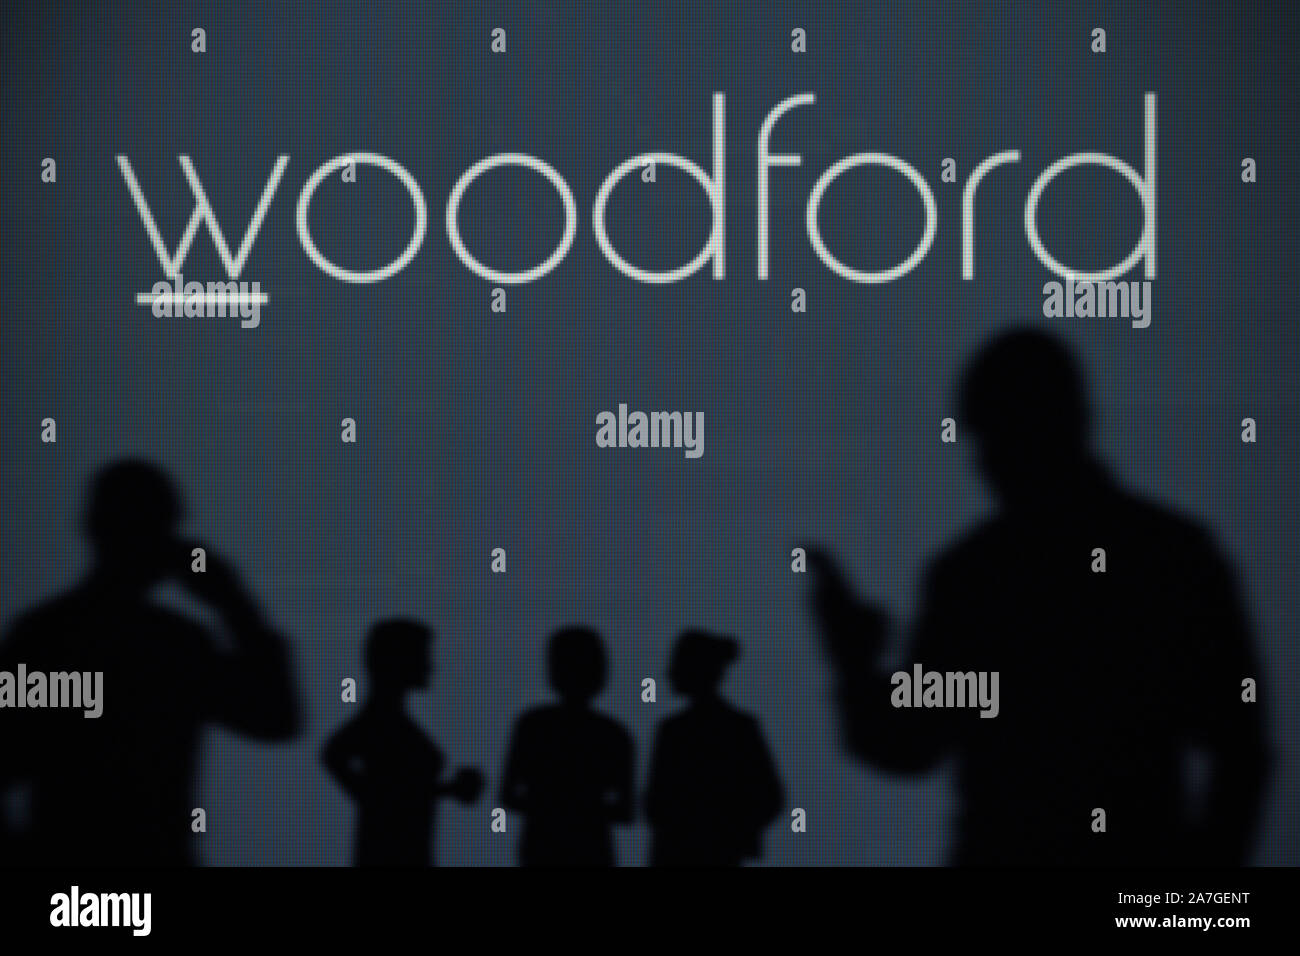 The Woodford Patient Capital Trust logo is seen on an LED screen in the background while a silhouetted person uses a smartphone (Editorial use only) Stock Photo